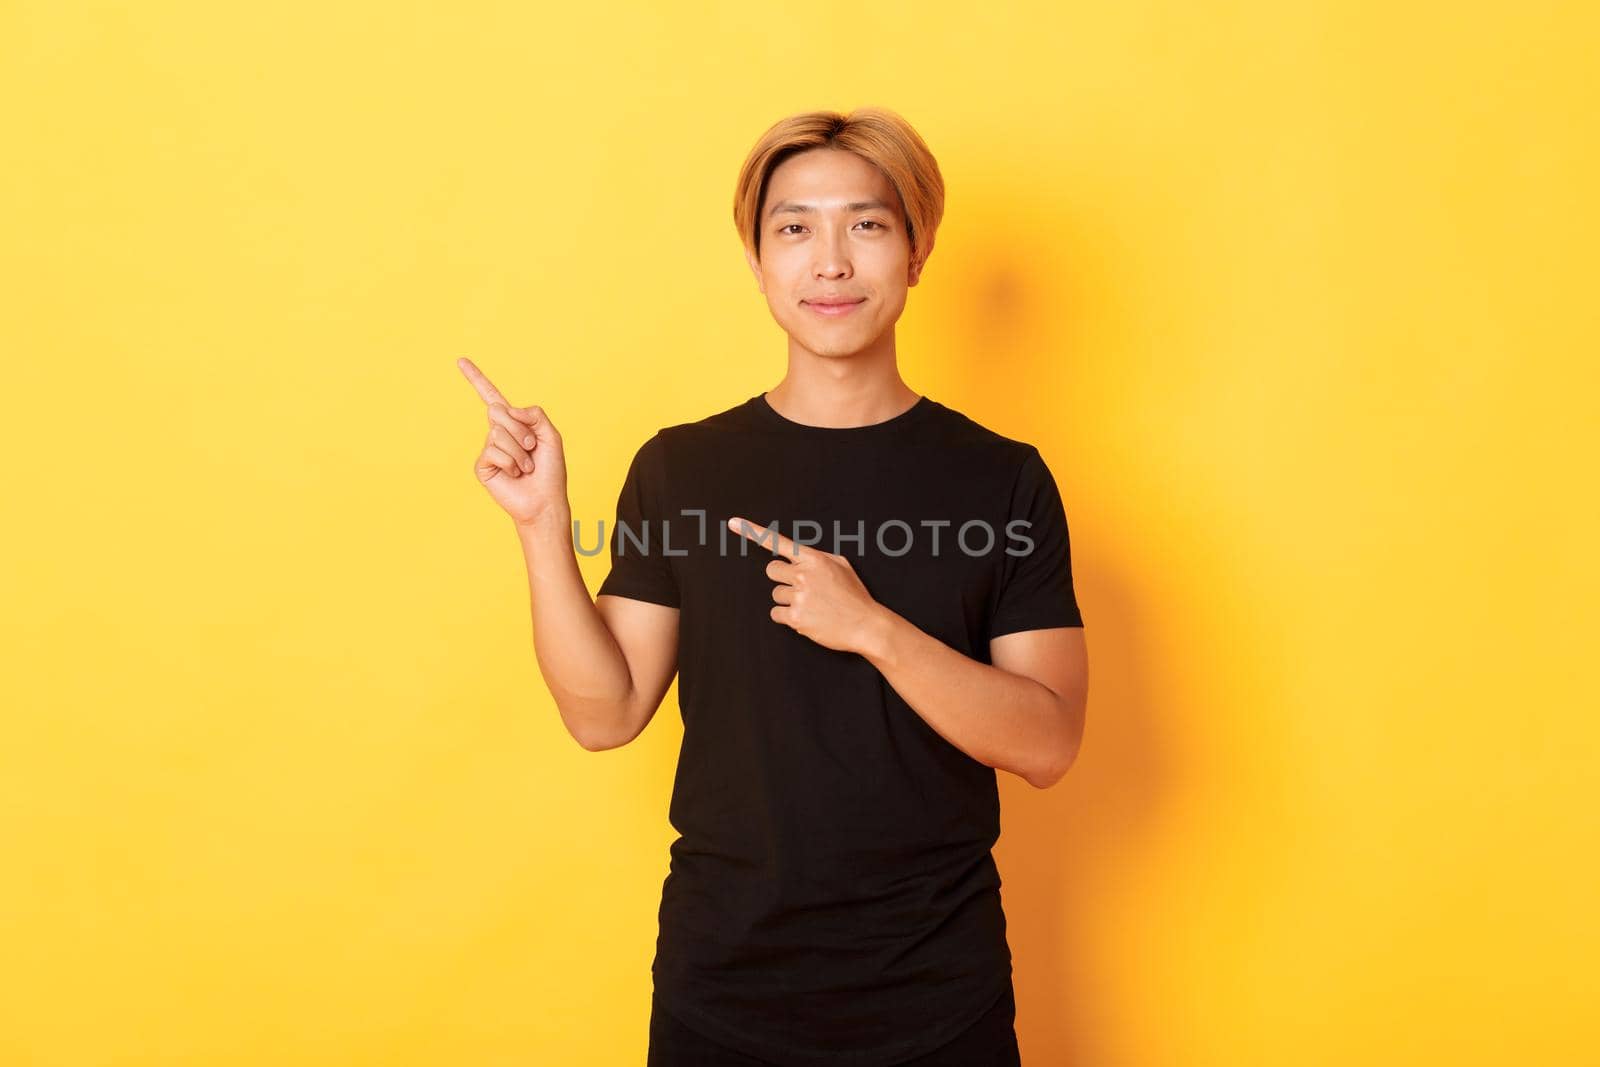 Portrait of smiling handsome asian man in black t-shirt pointing fingers upper left corner, showing logo or banner, yellow background.